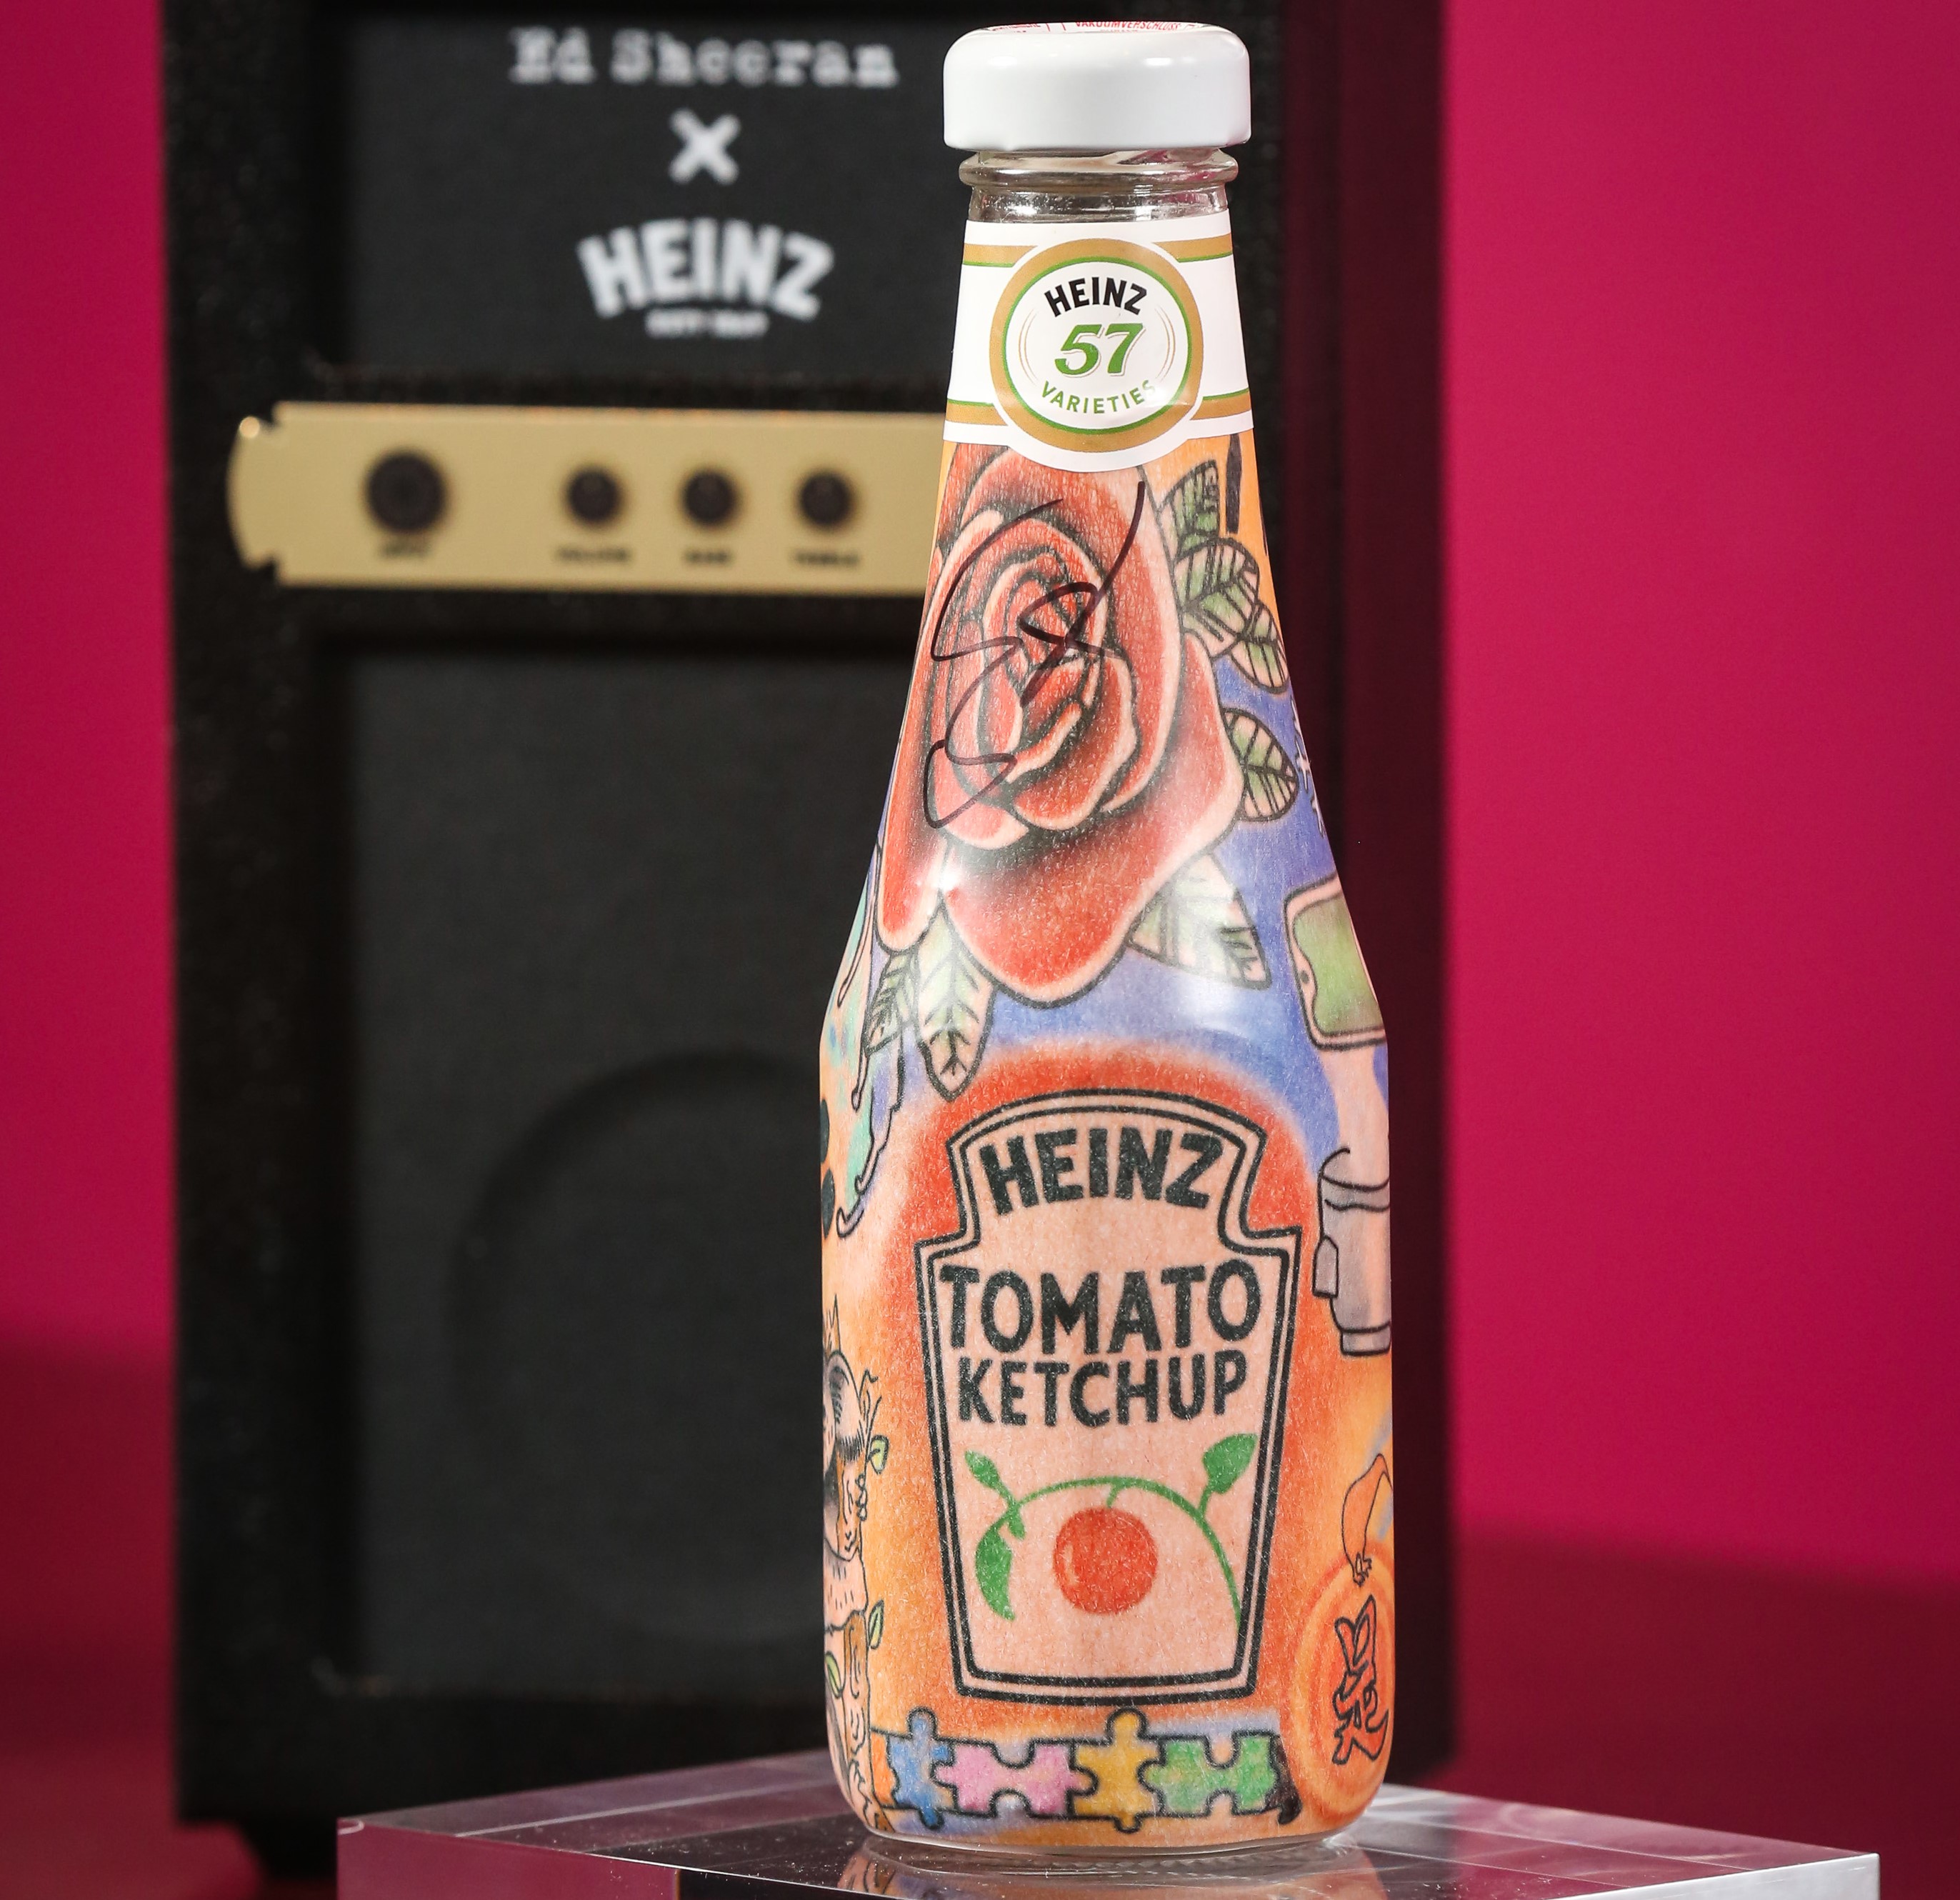 Ed Sheeran and Heinz partner on limited-edition bottle